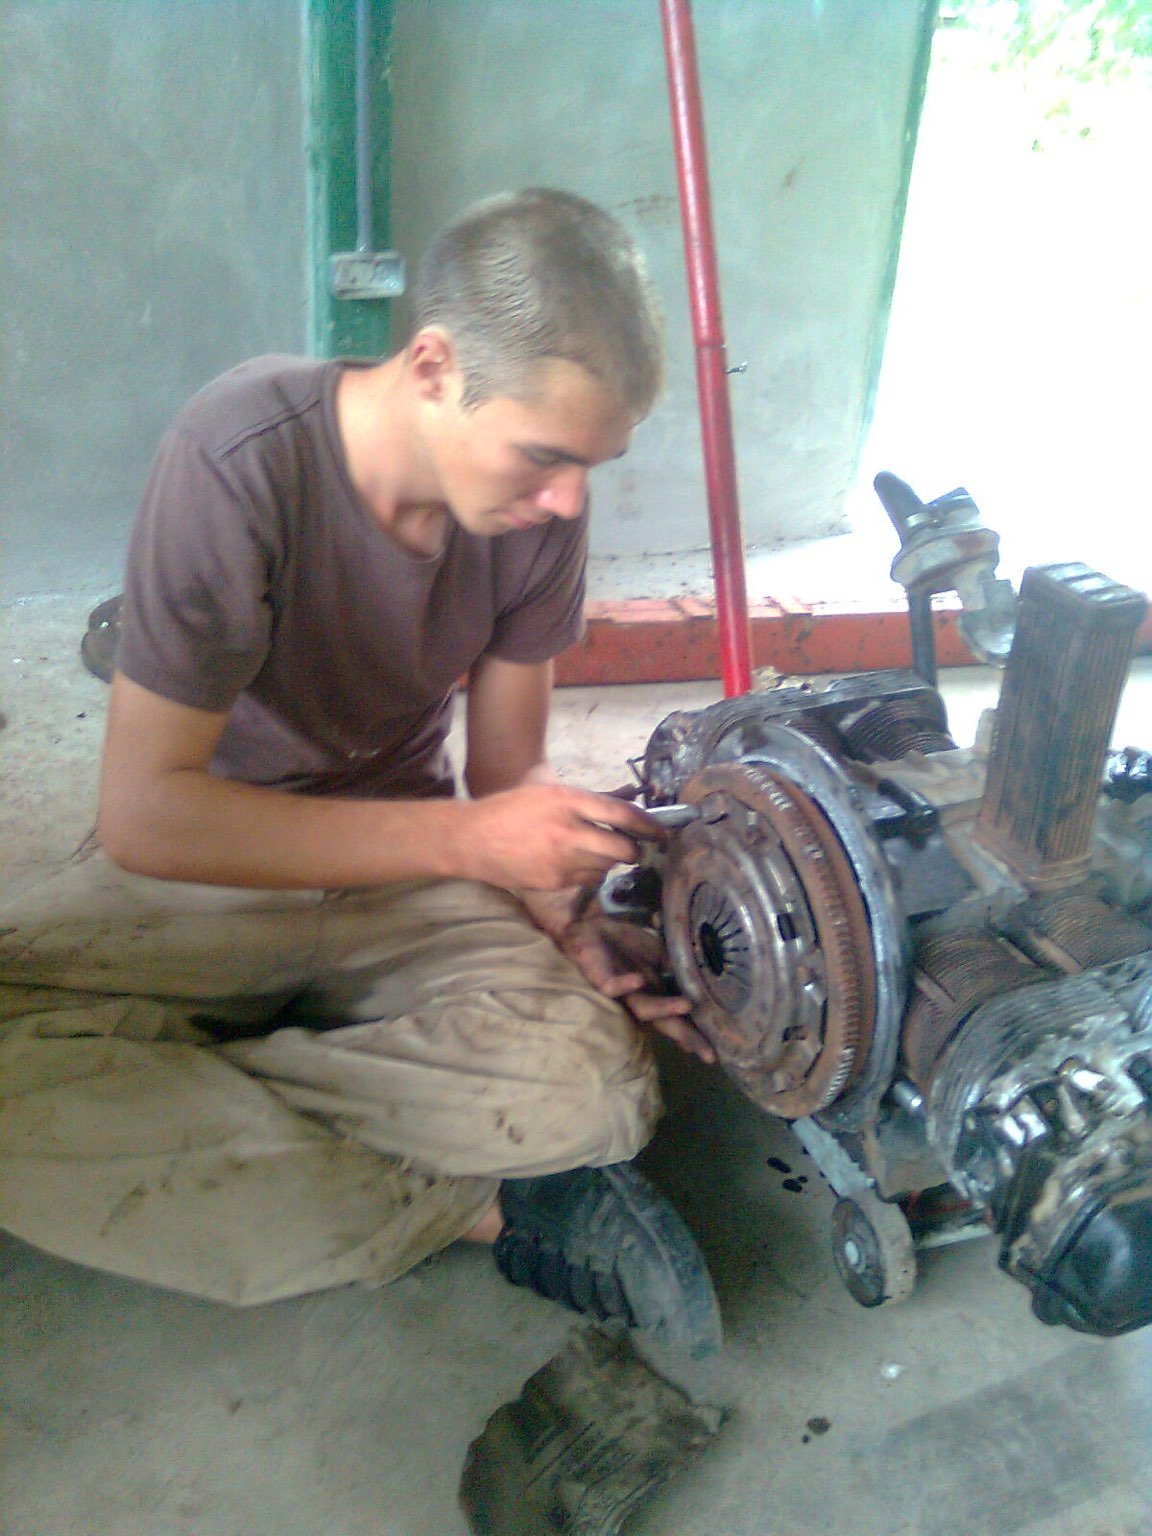 Mechanic shop with car parts everywhere. A person inspects the engine supported by a jack.